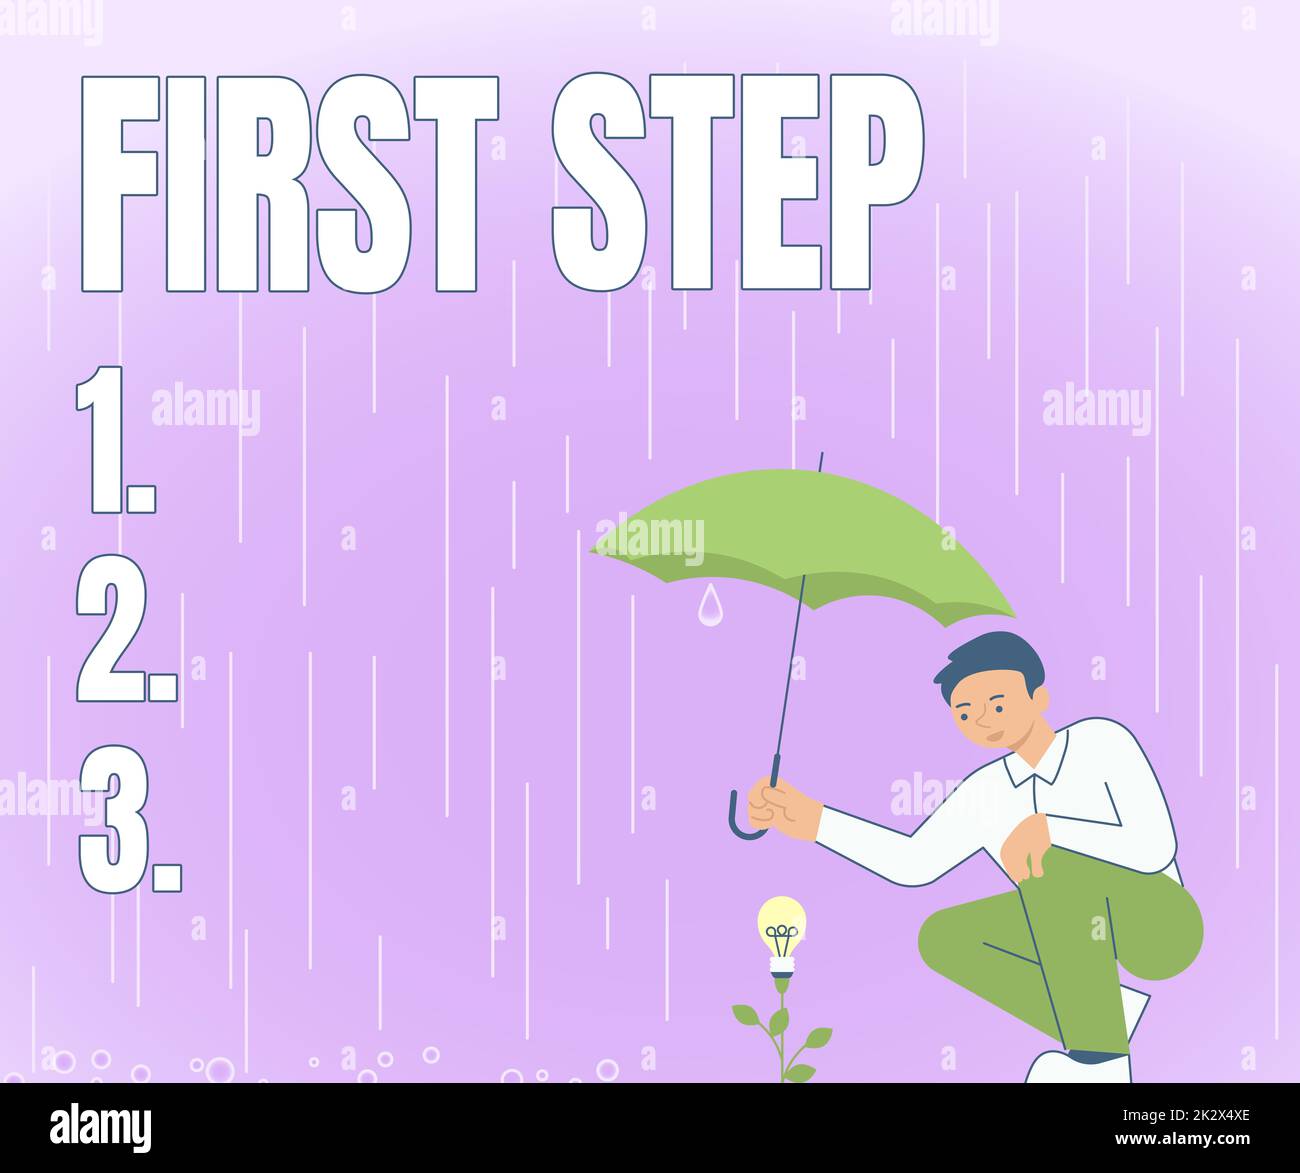 Text caption presenting First Step. Business approach Pertaining to the start of a certain process or beginning Gentleman Holding Umbrella Growing Flower Presenting Newest Project Ideas. Stock Photo